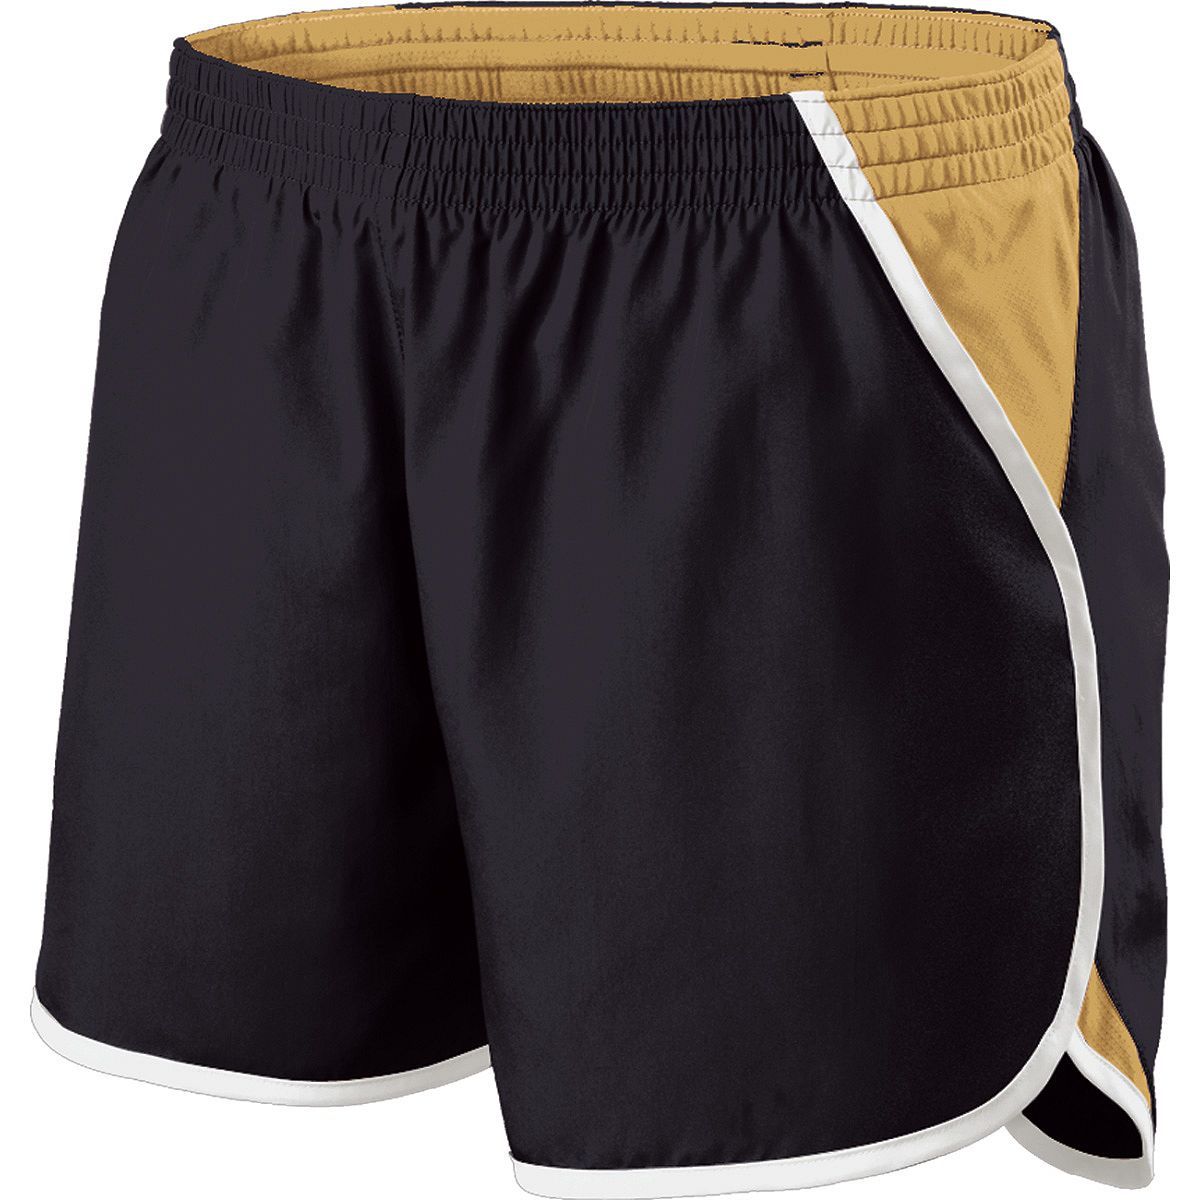 Holloway Girls Energize Shorts in Black/Vegas Gold/White  -Part of the Girls, Holloway, Girls-Shorts product lines at KanaleyCreations.com